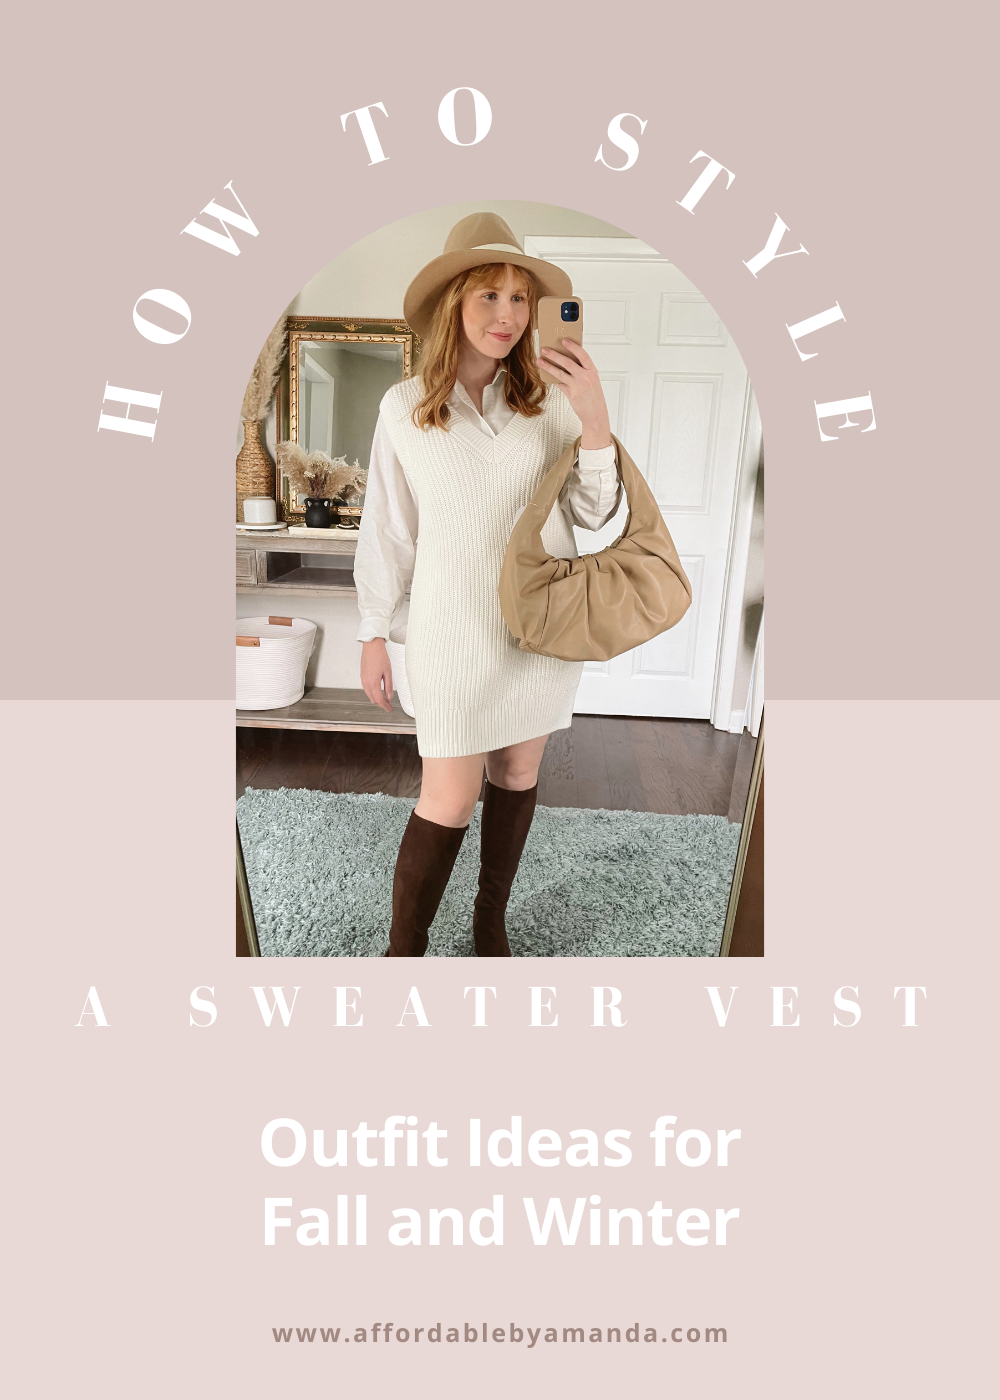 How to Style a Sweater Vest 2021. How to Style a Cropped Sweater Vest. Sweater Vest with Skirt. Sweater Vest with Turtleneck Underneath.